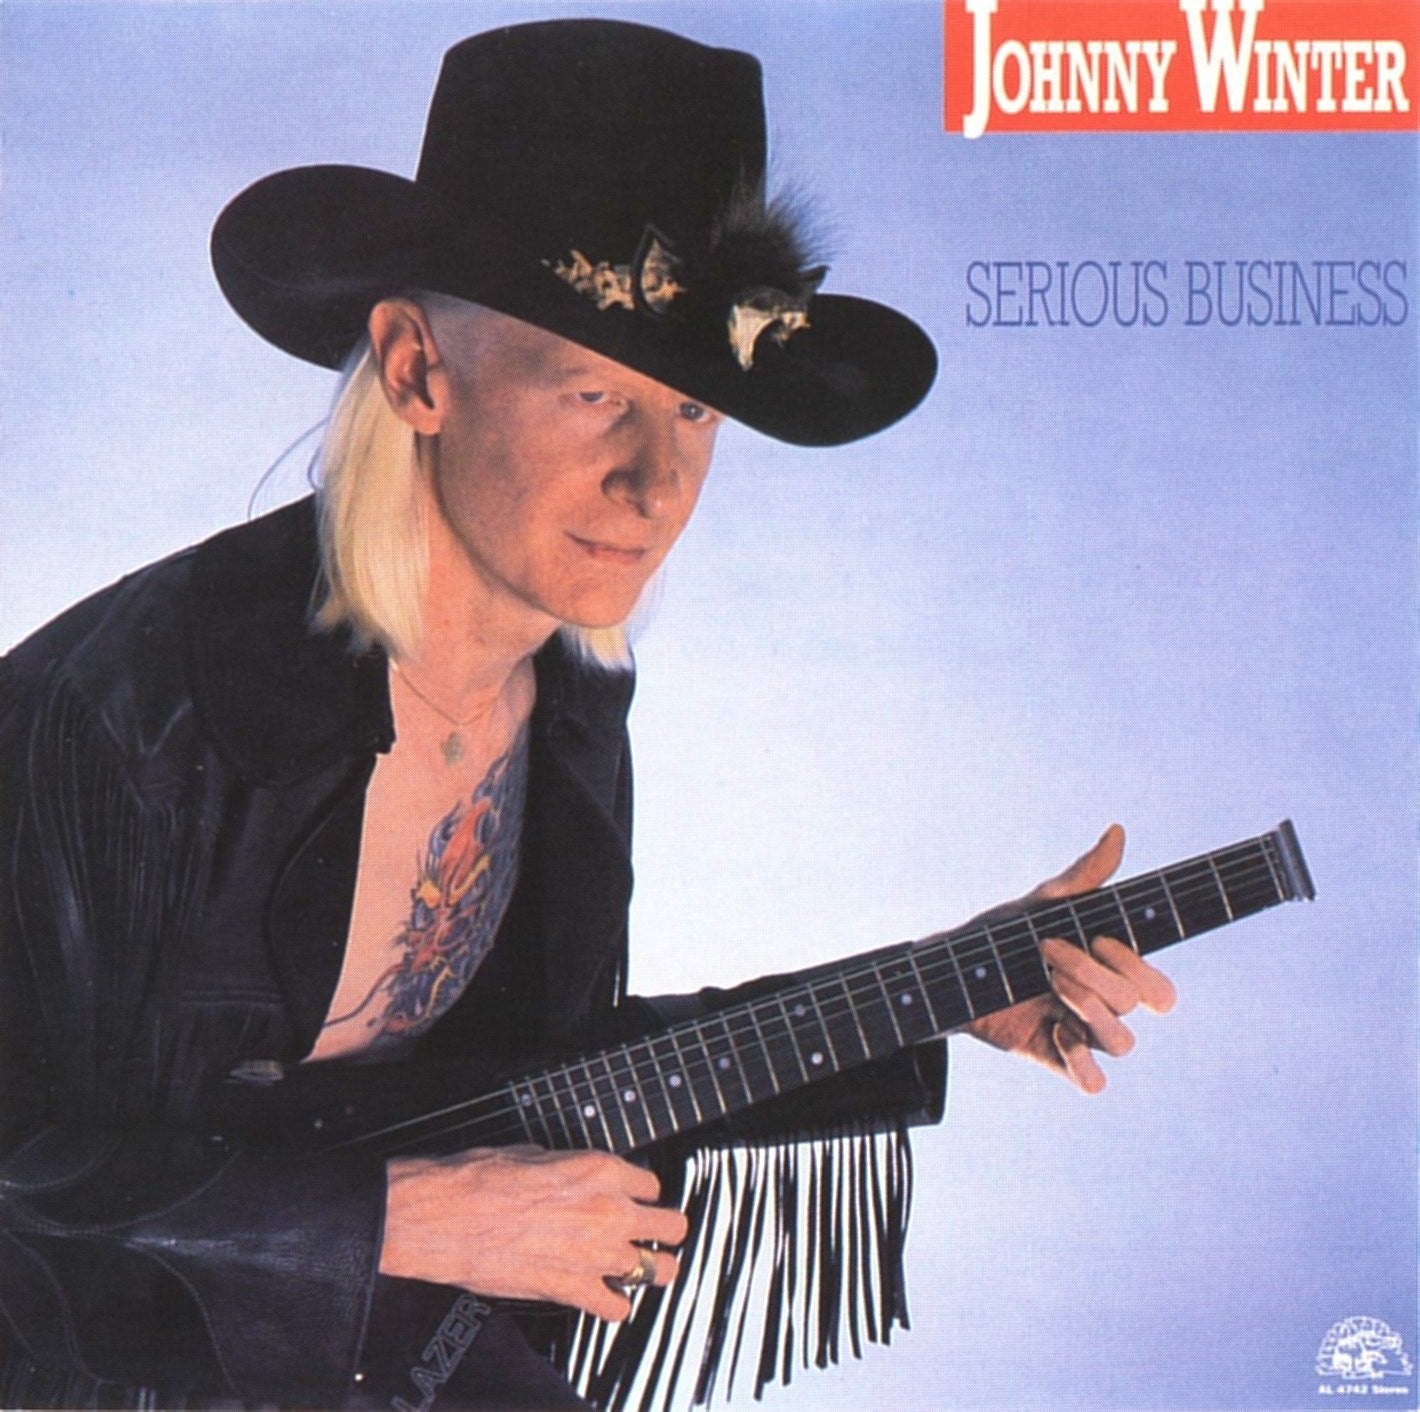 Winter, Johnny - Serious Business